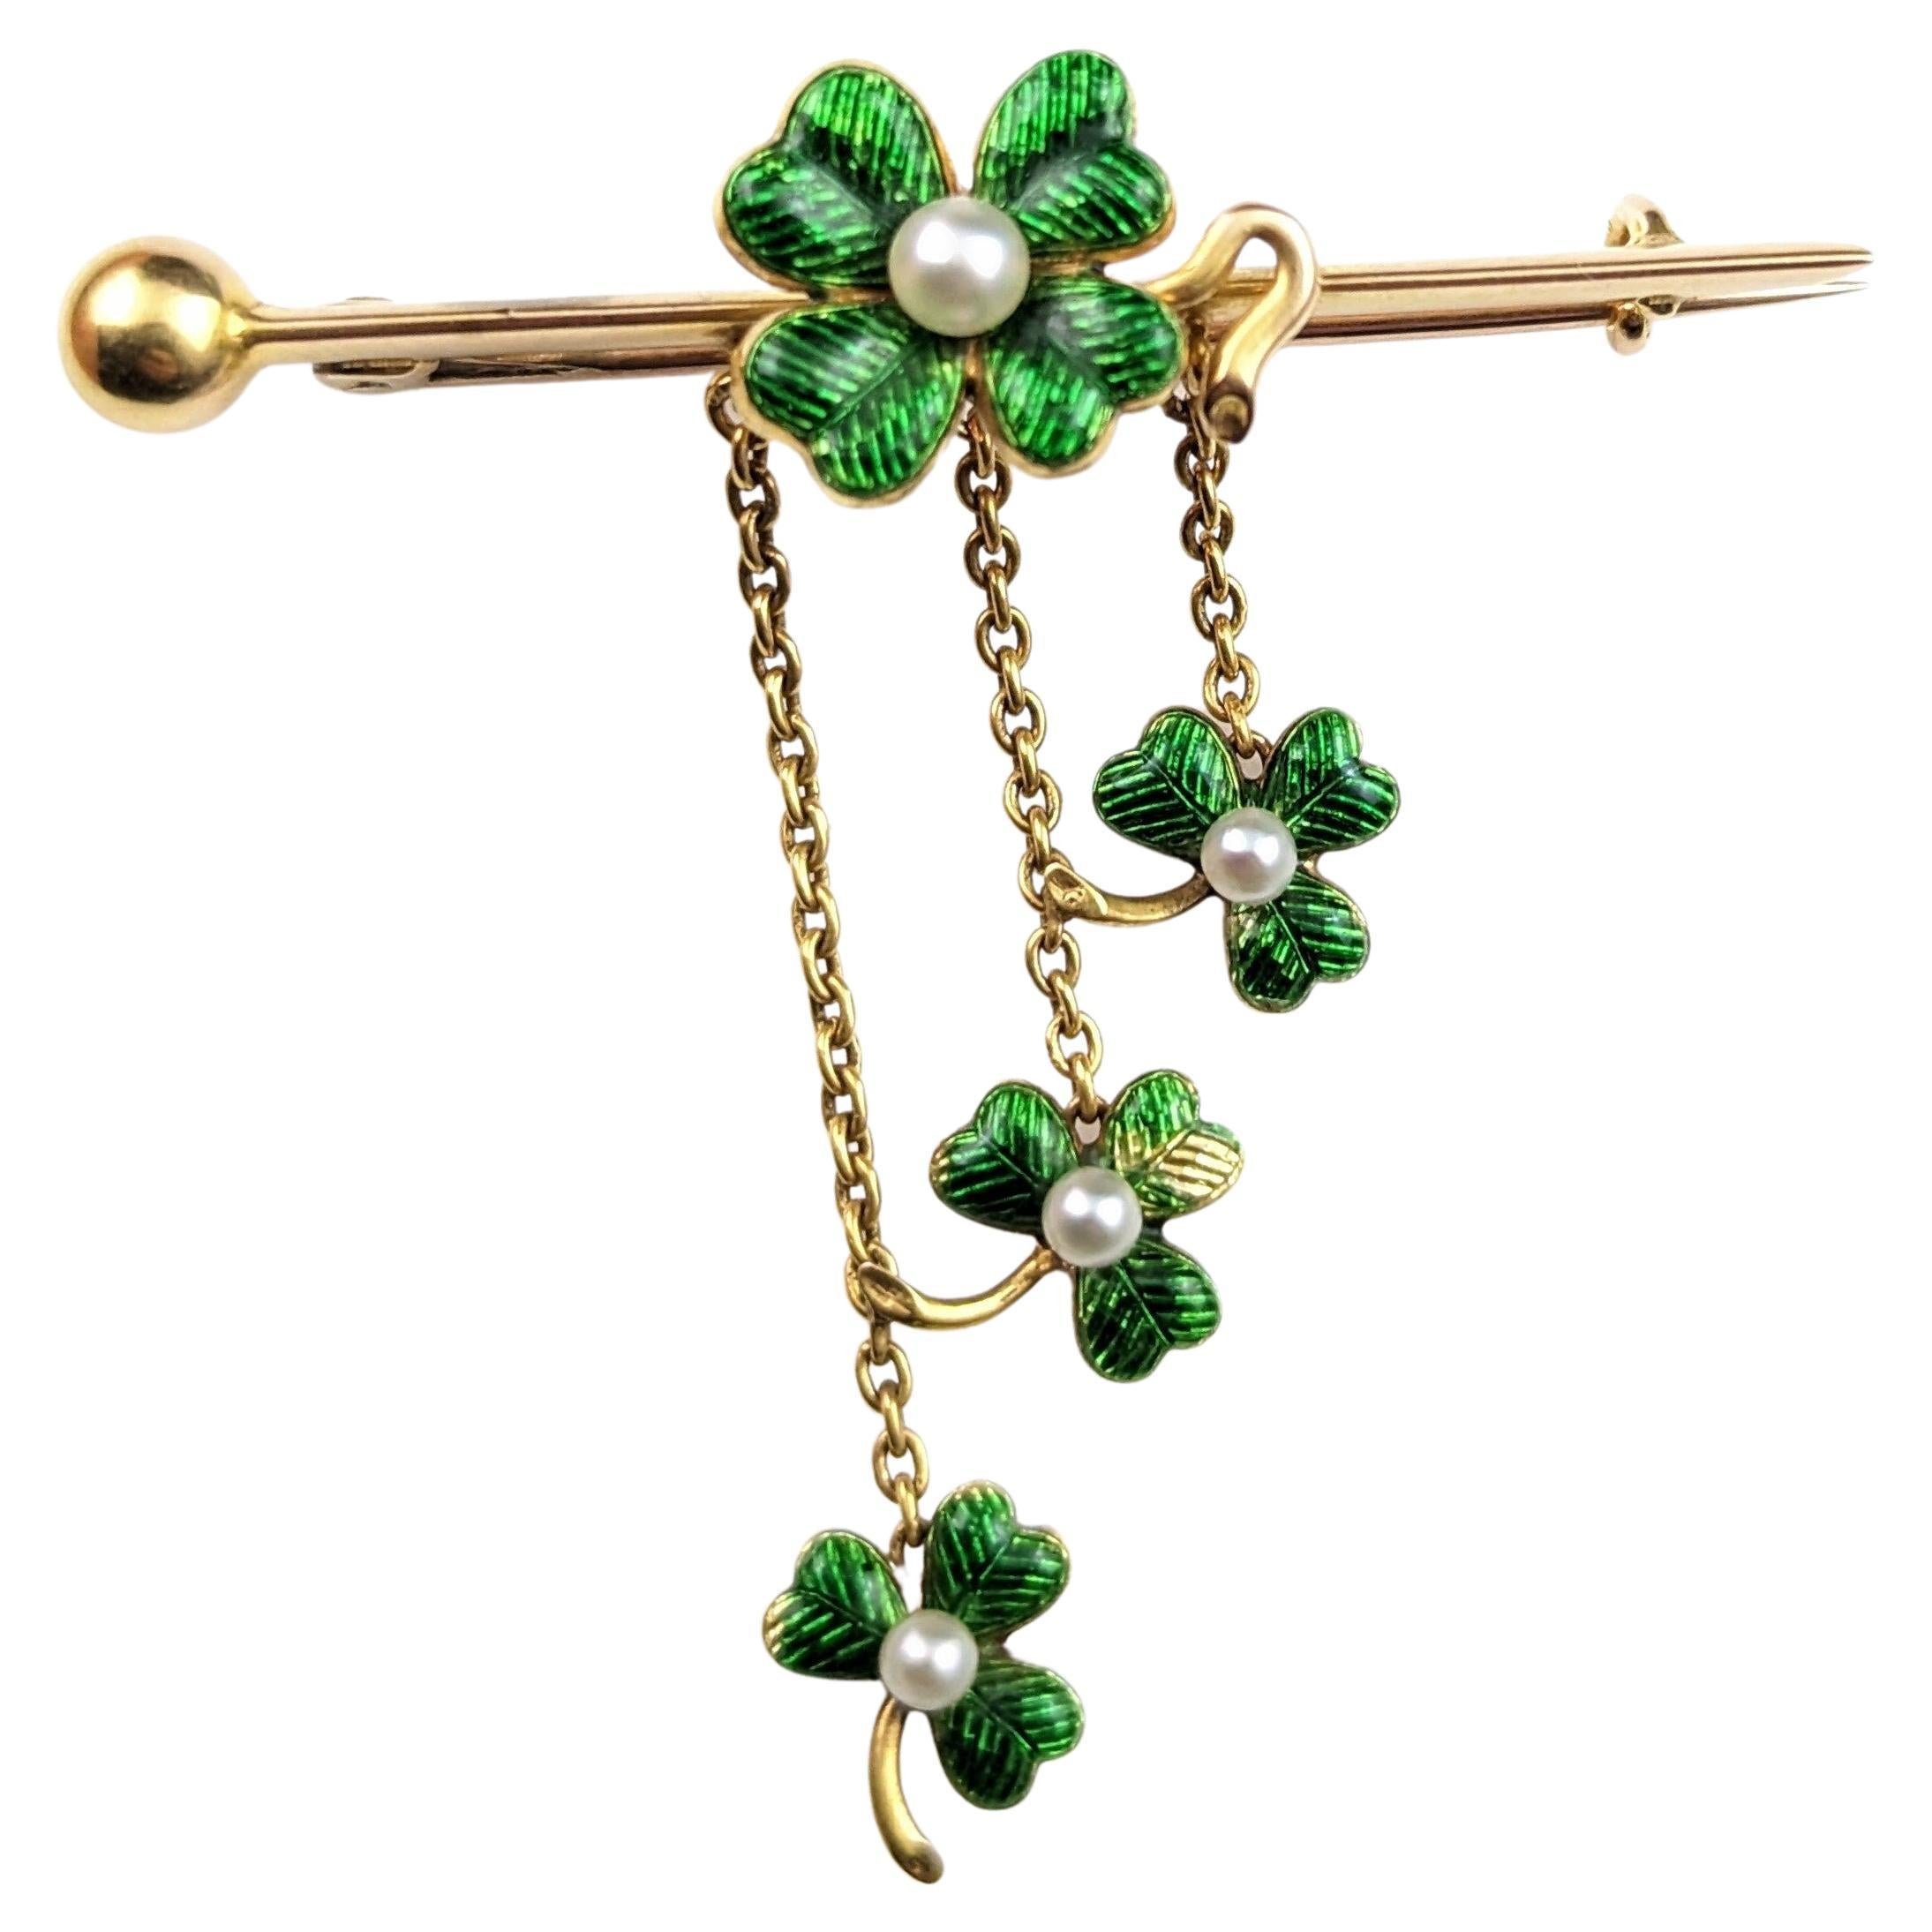 Antique Shamrock brooch, 15k gold, Guilloche enamel and seed pearl